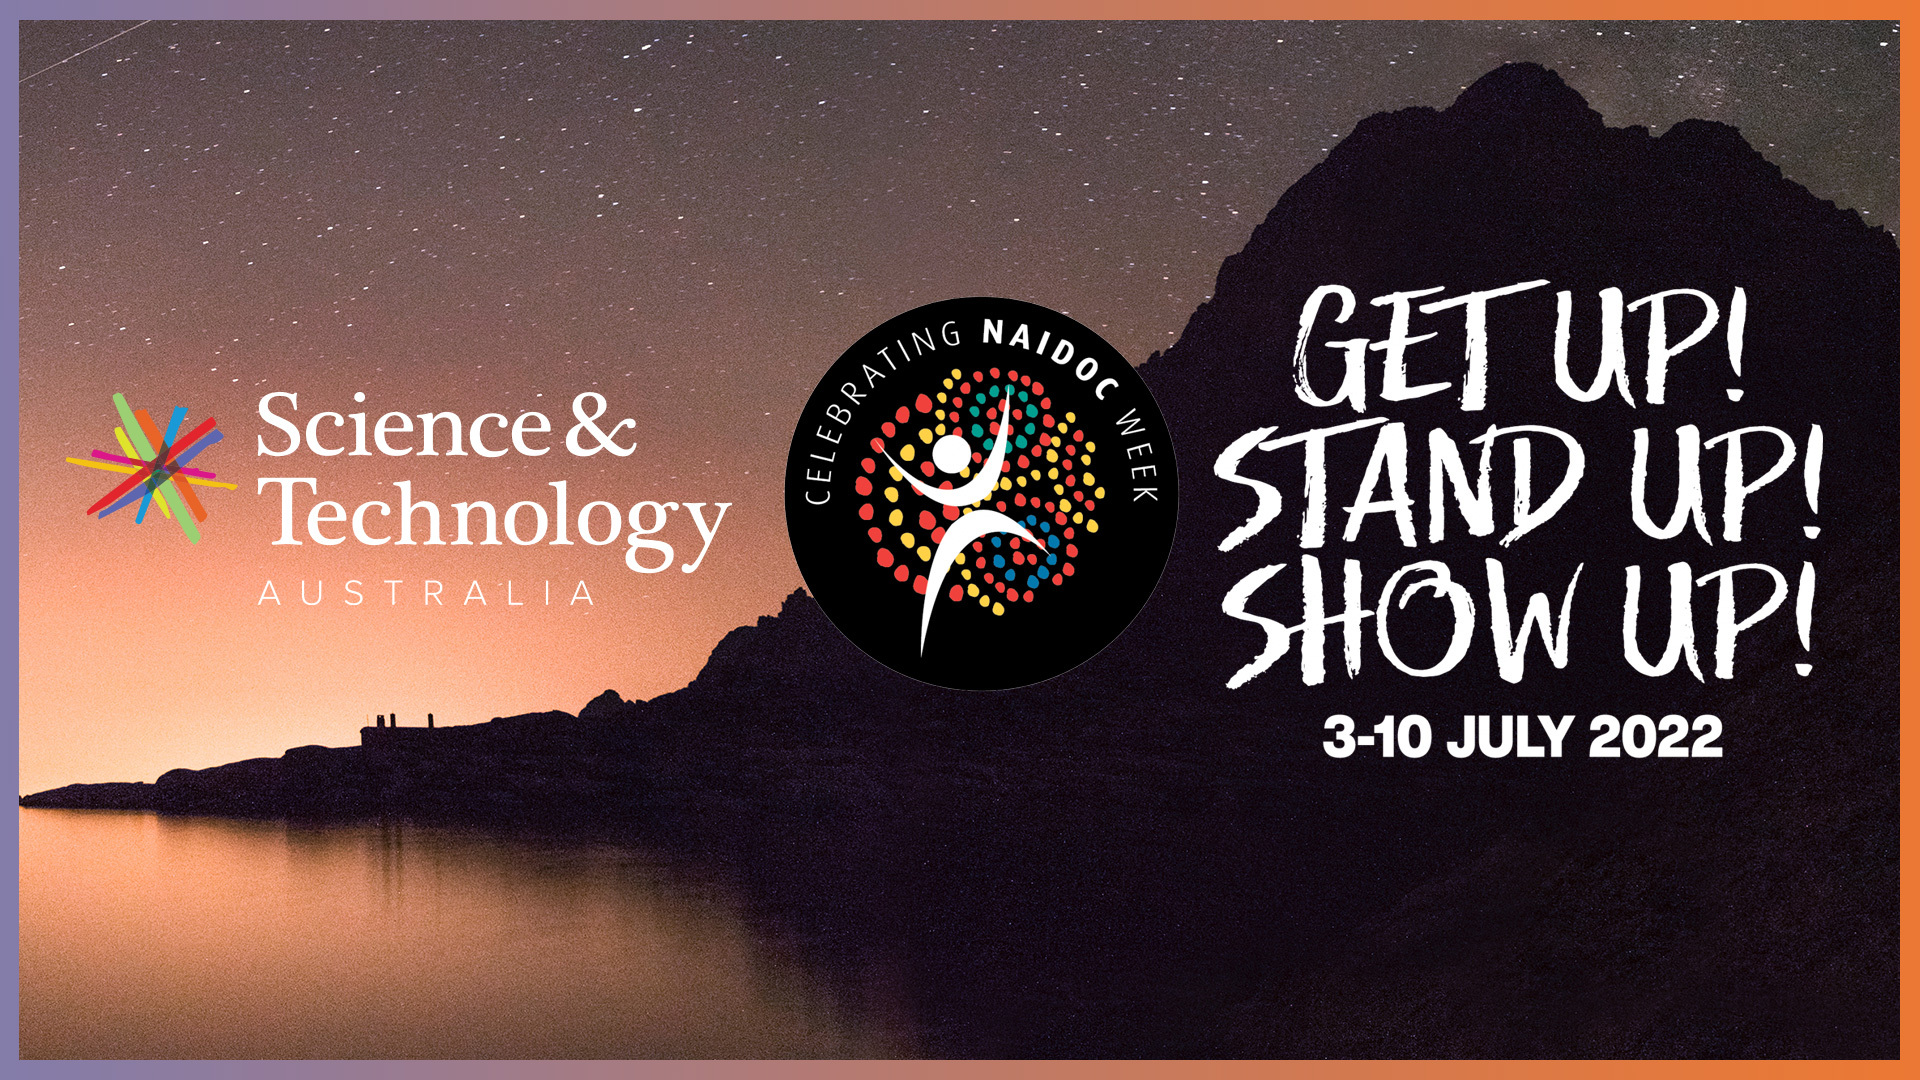 NAIDOC Week 2022 logo with text of the year's theme: get up, stand up, show up. Alongside is the Science and Technology Australia logo, and both are on an image of a mountain and river at sunset.